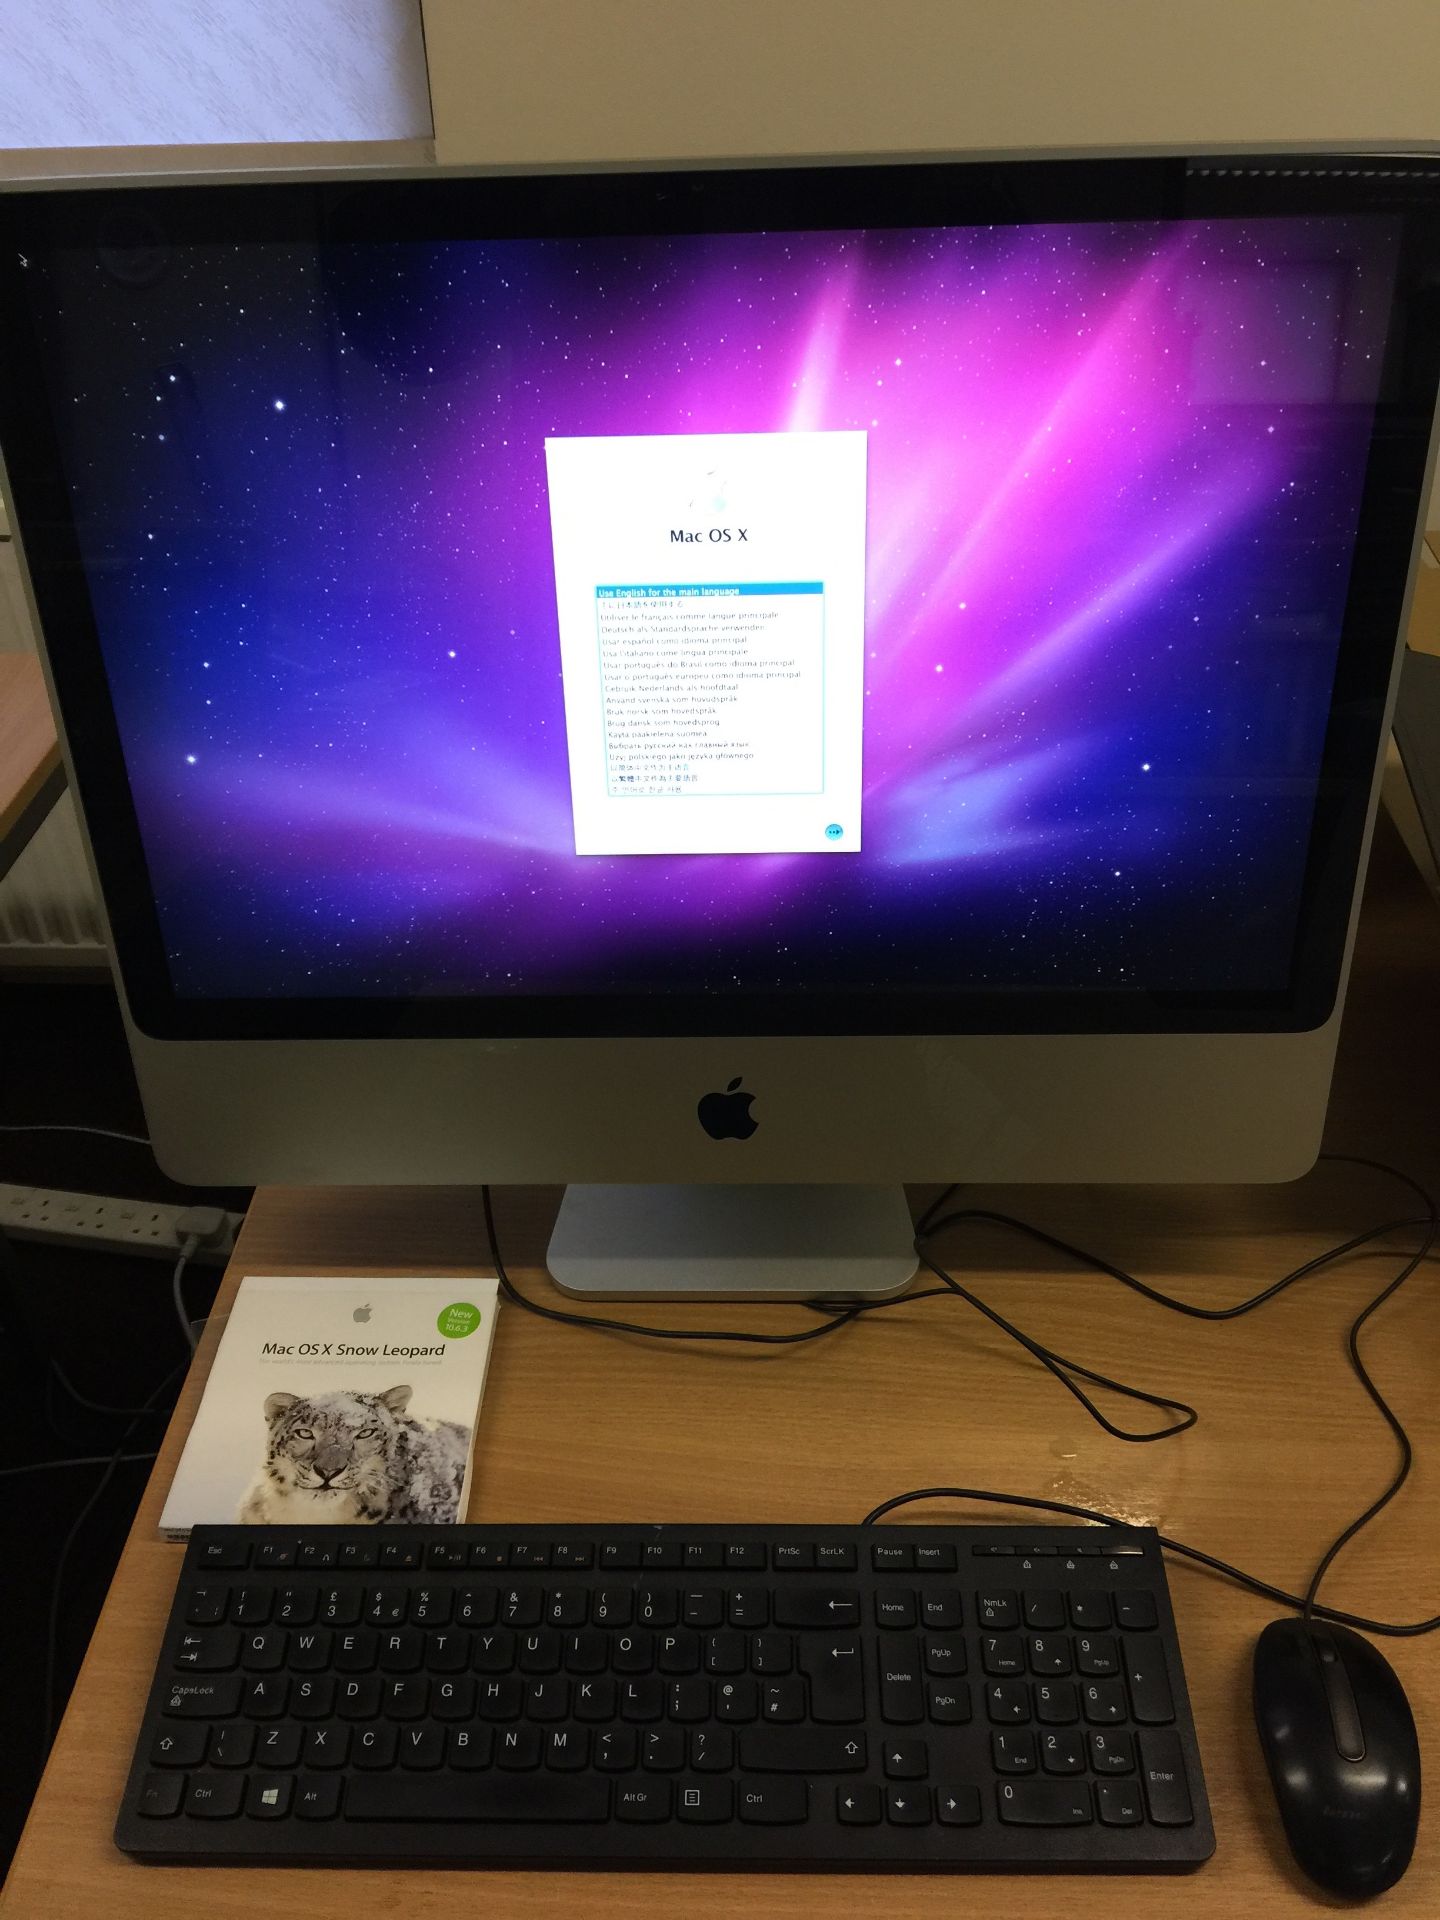 Apple Imac 24" computer, hard drive has been cleared